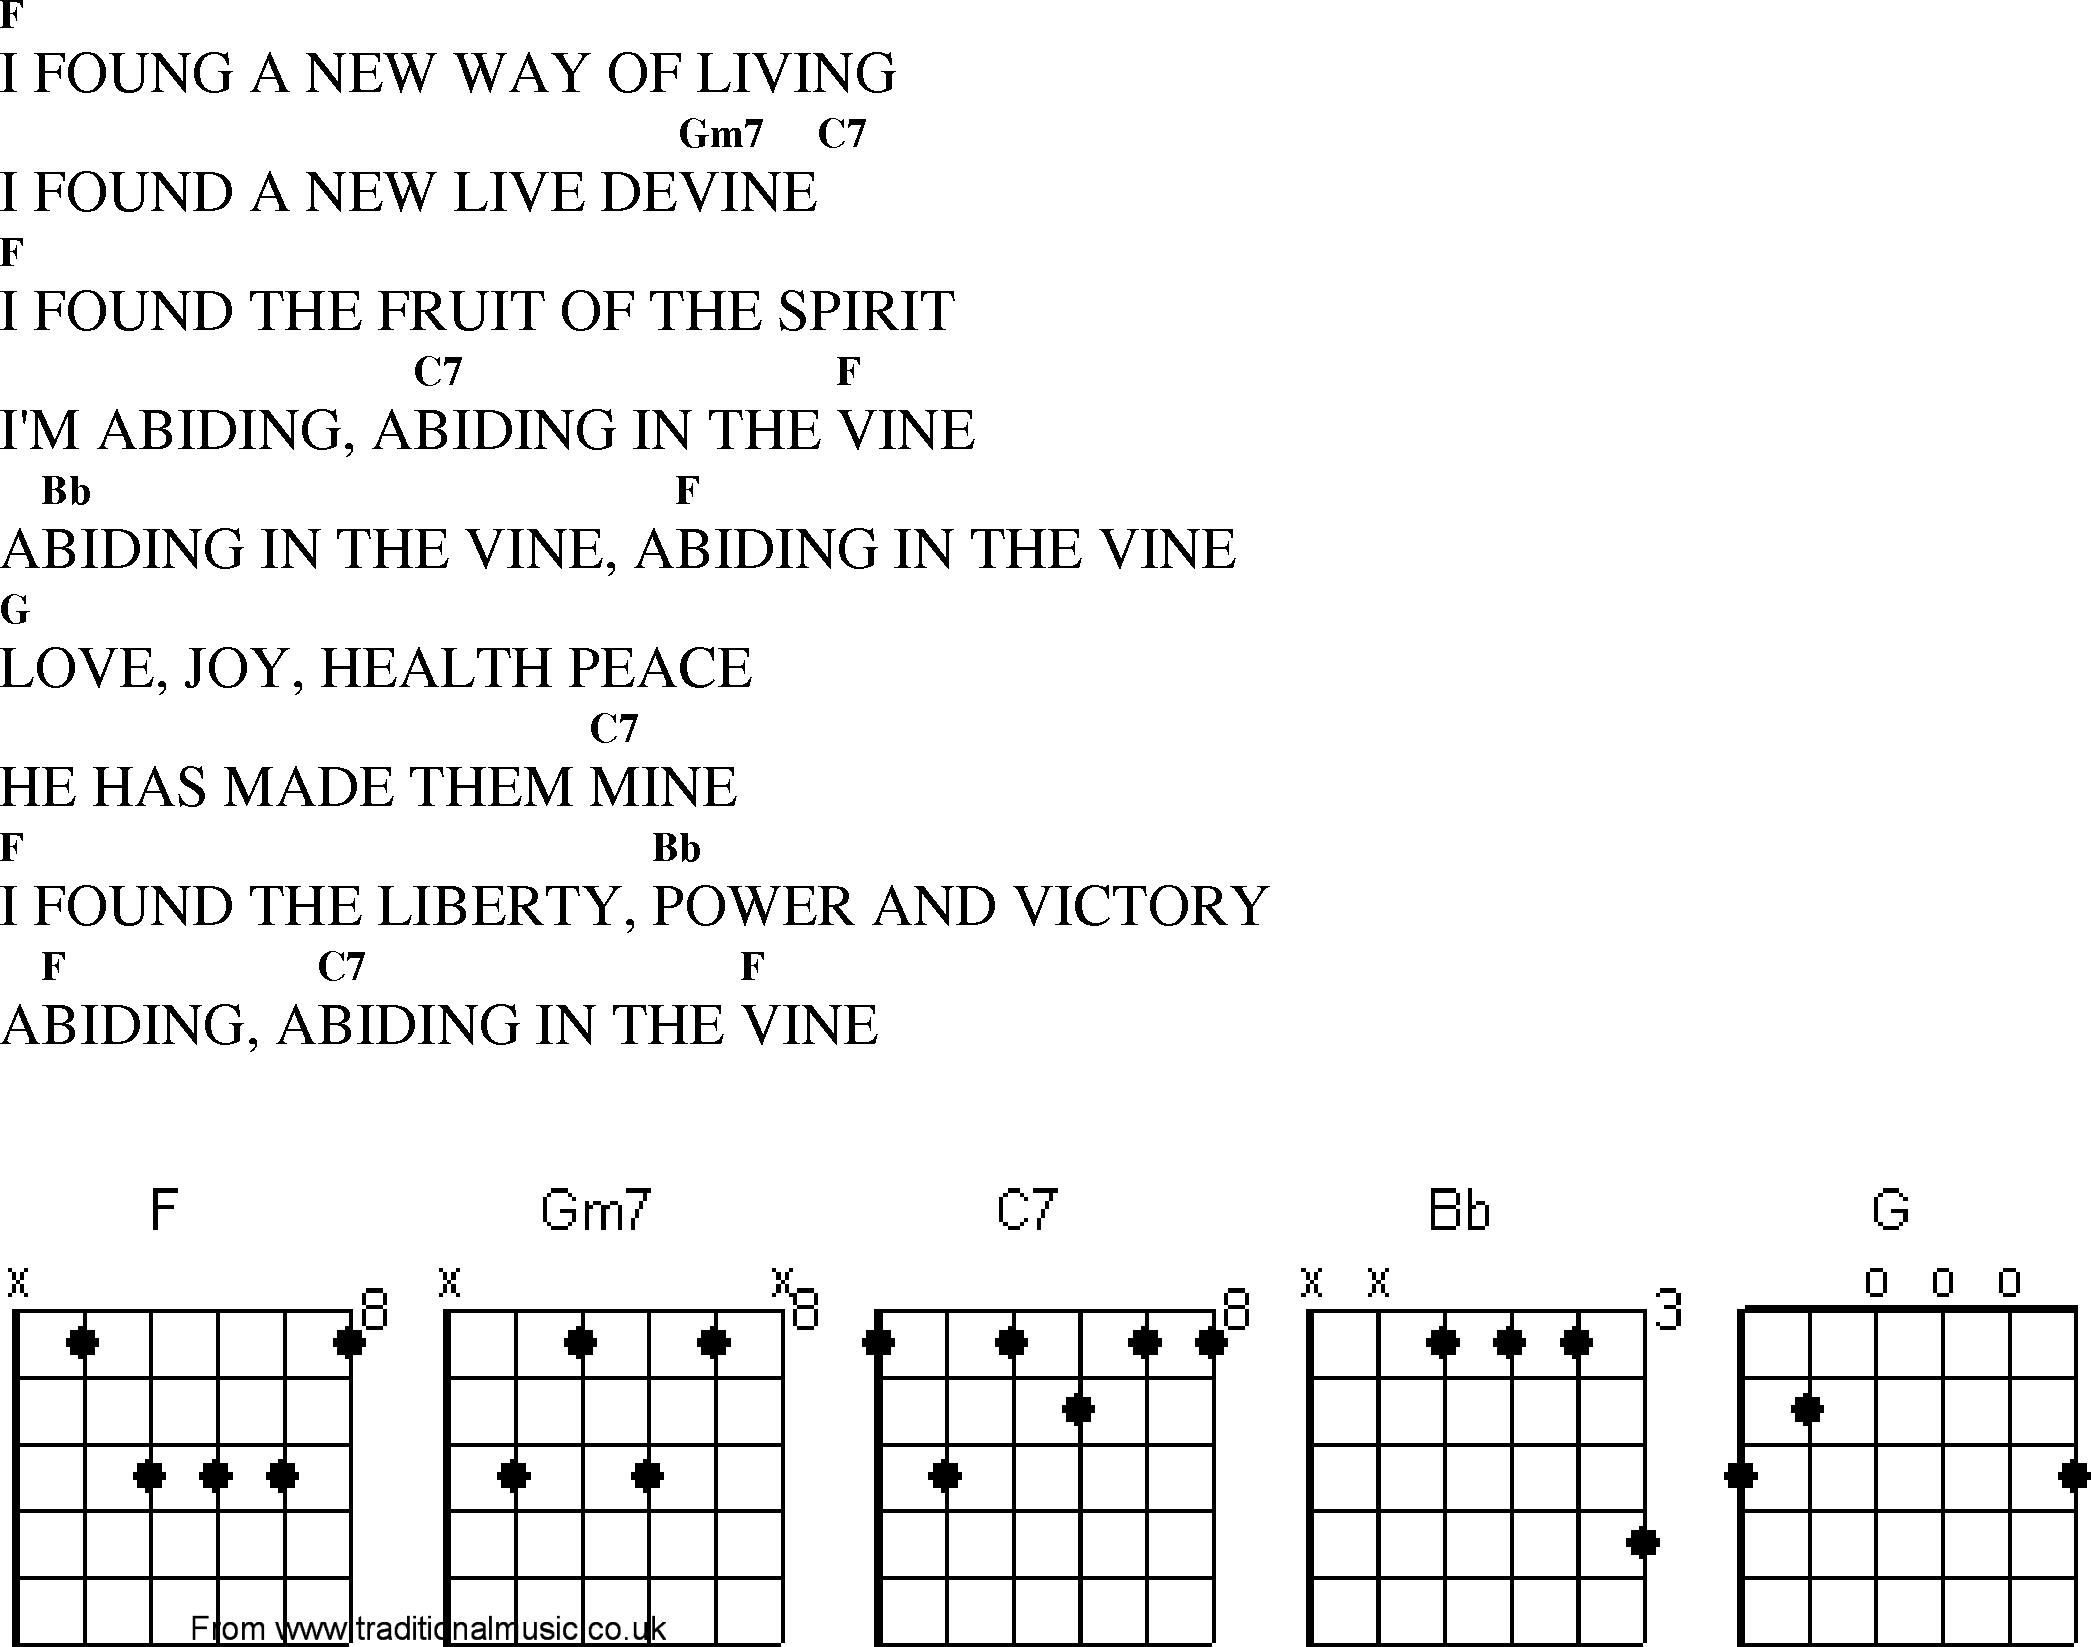 Gospel Song: i_foun__new_wy_of_living, lyrics and chords.